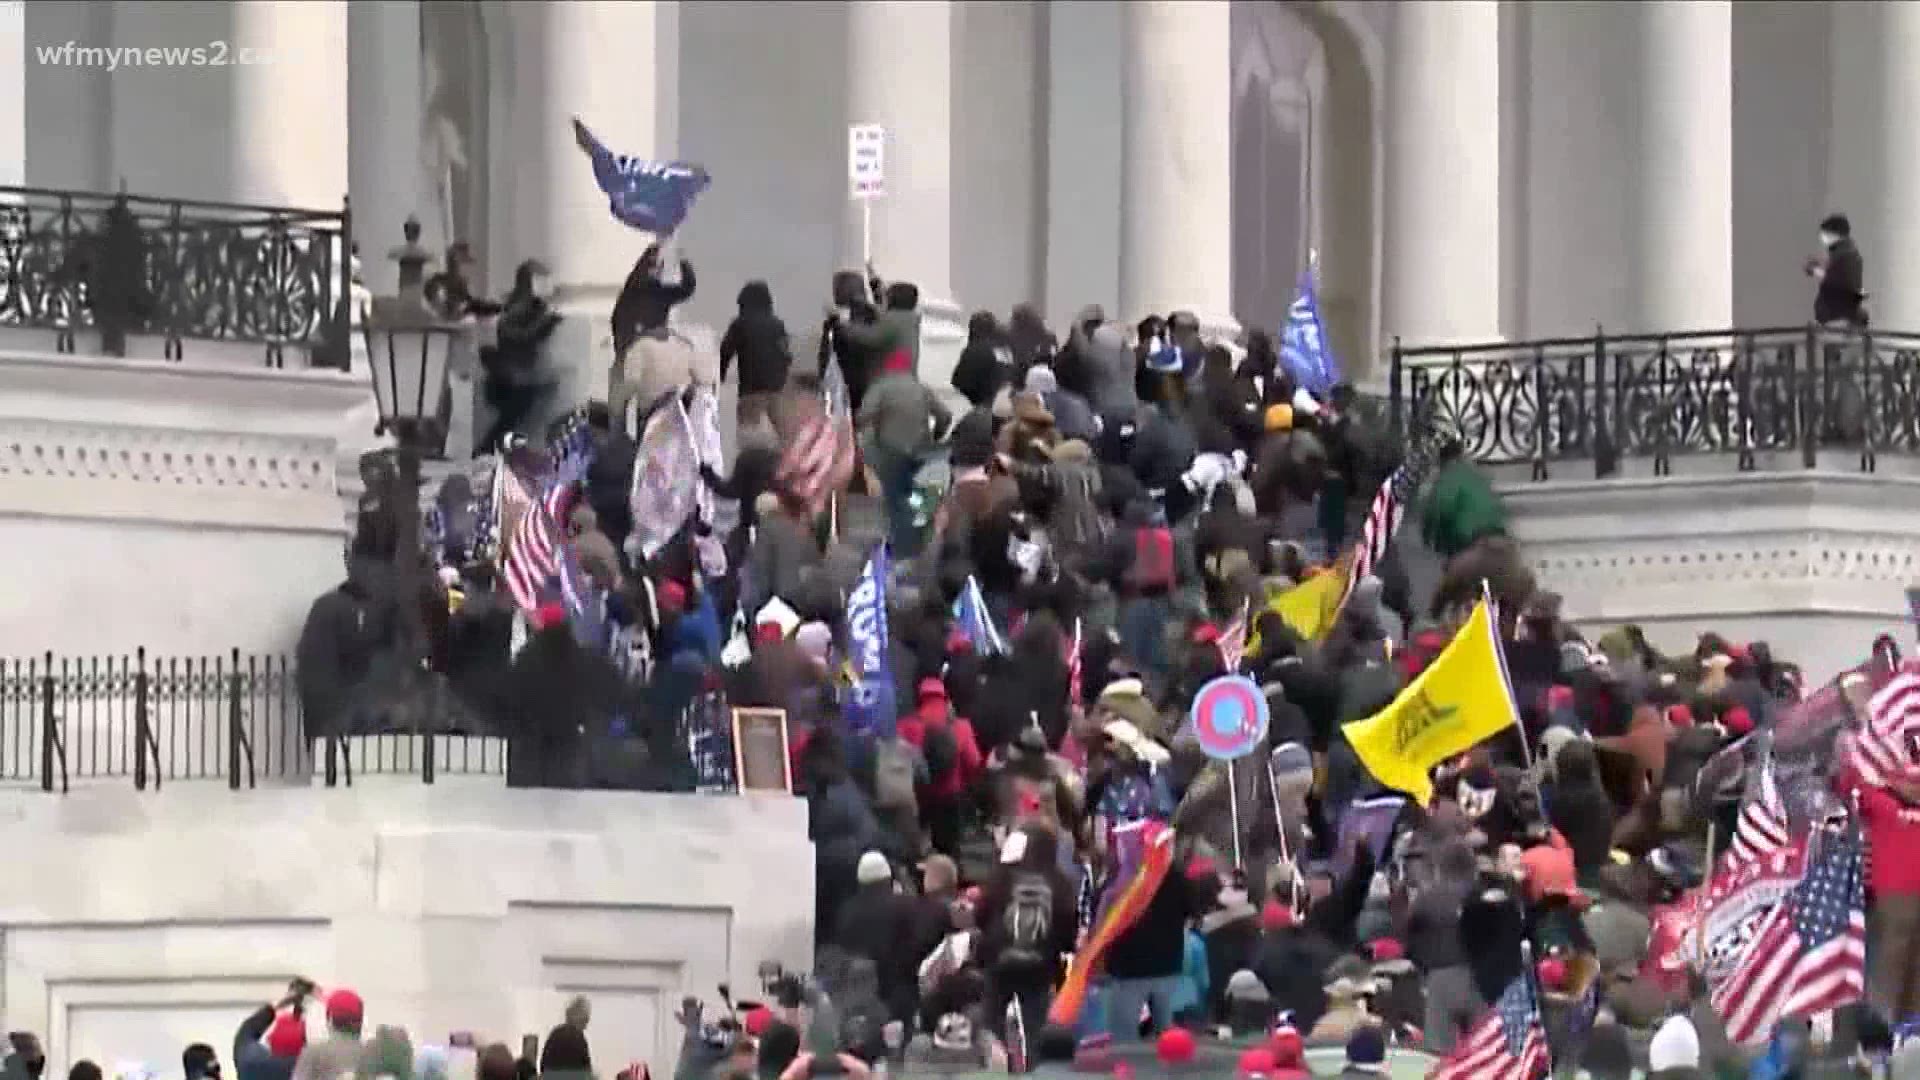 Lawmakers had to take cover in their chambers as people invaded the U.S. Capitol building.